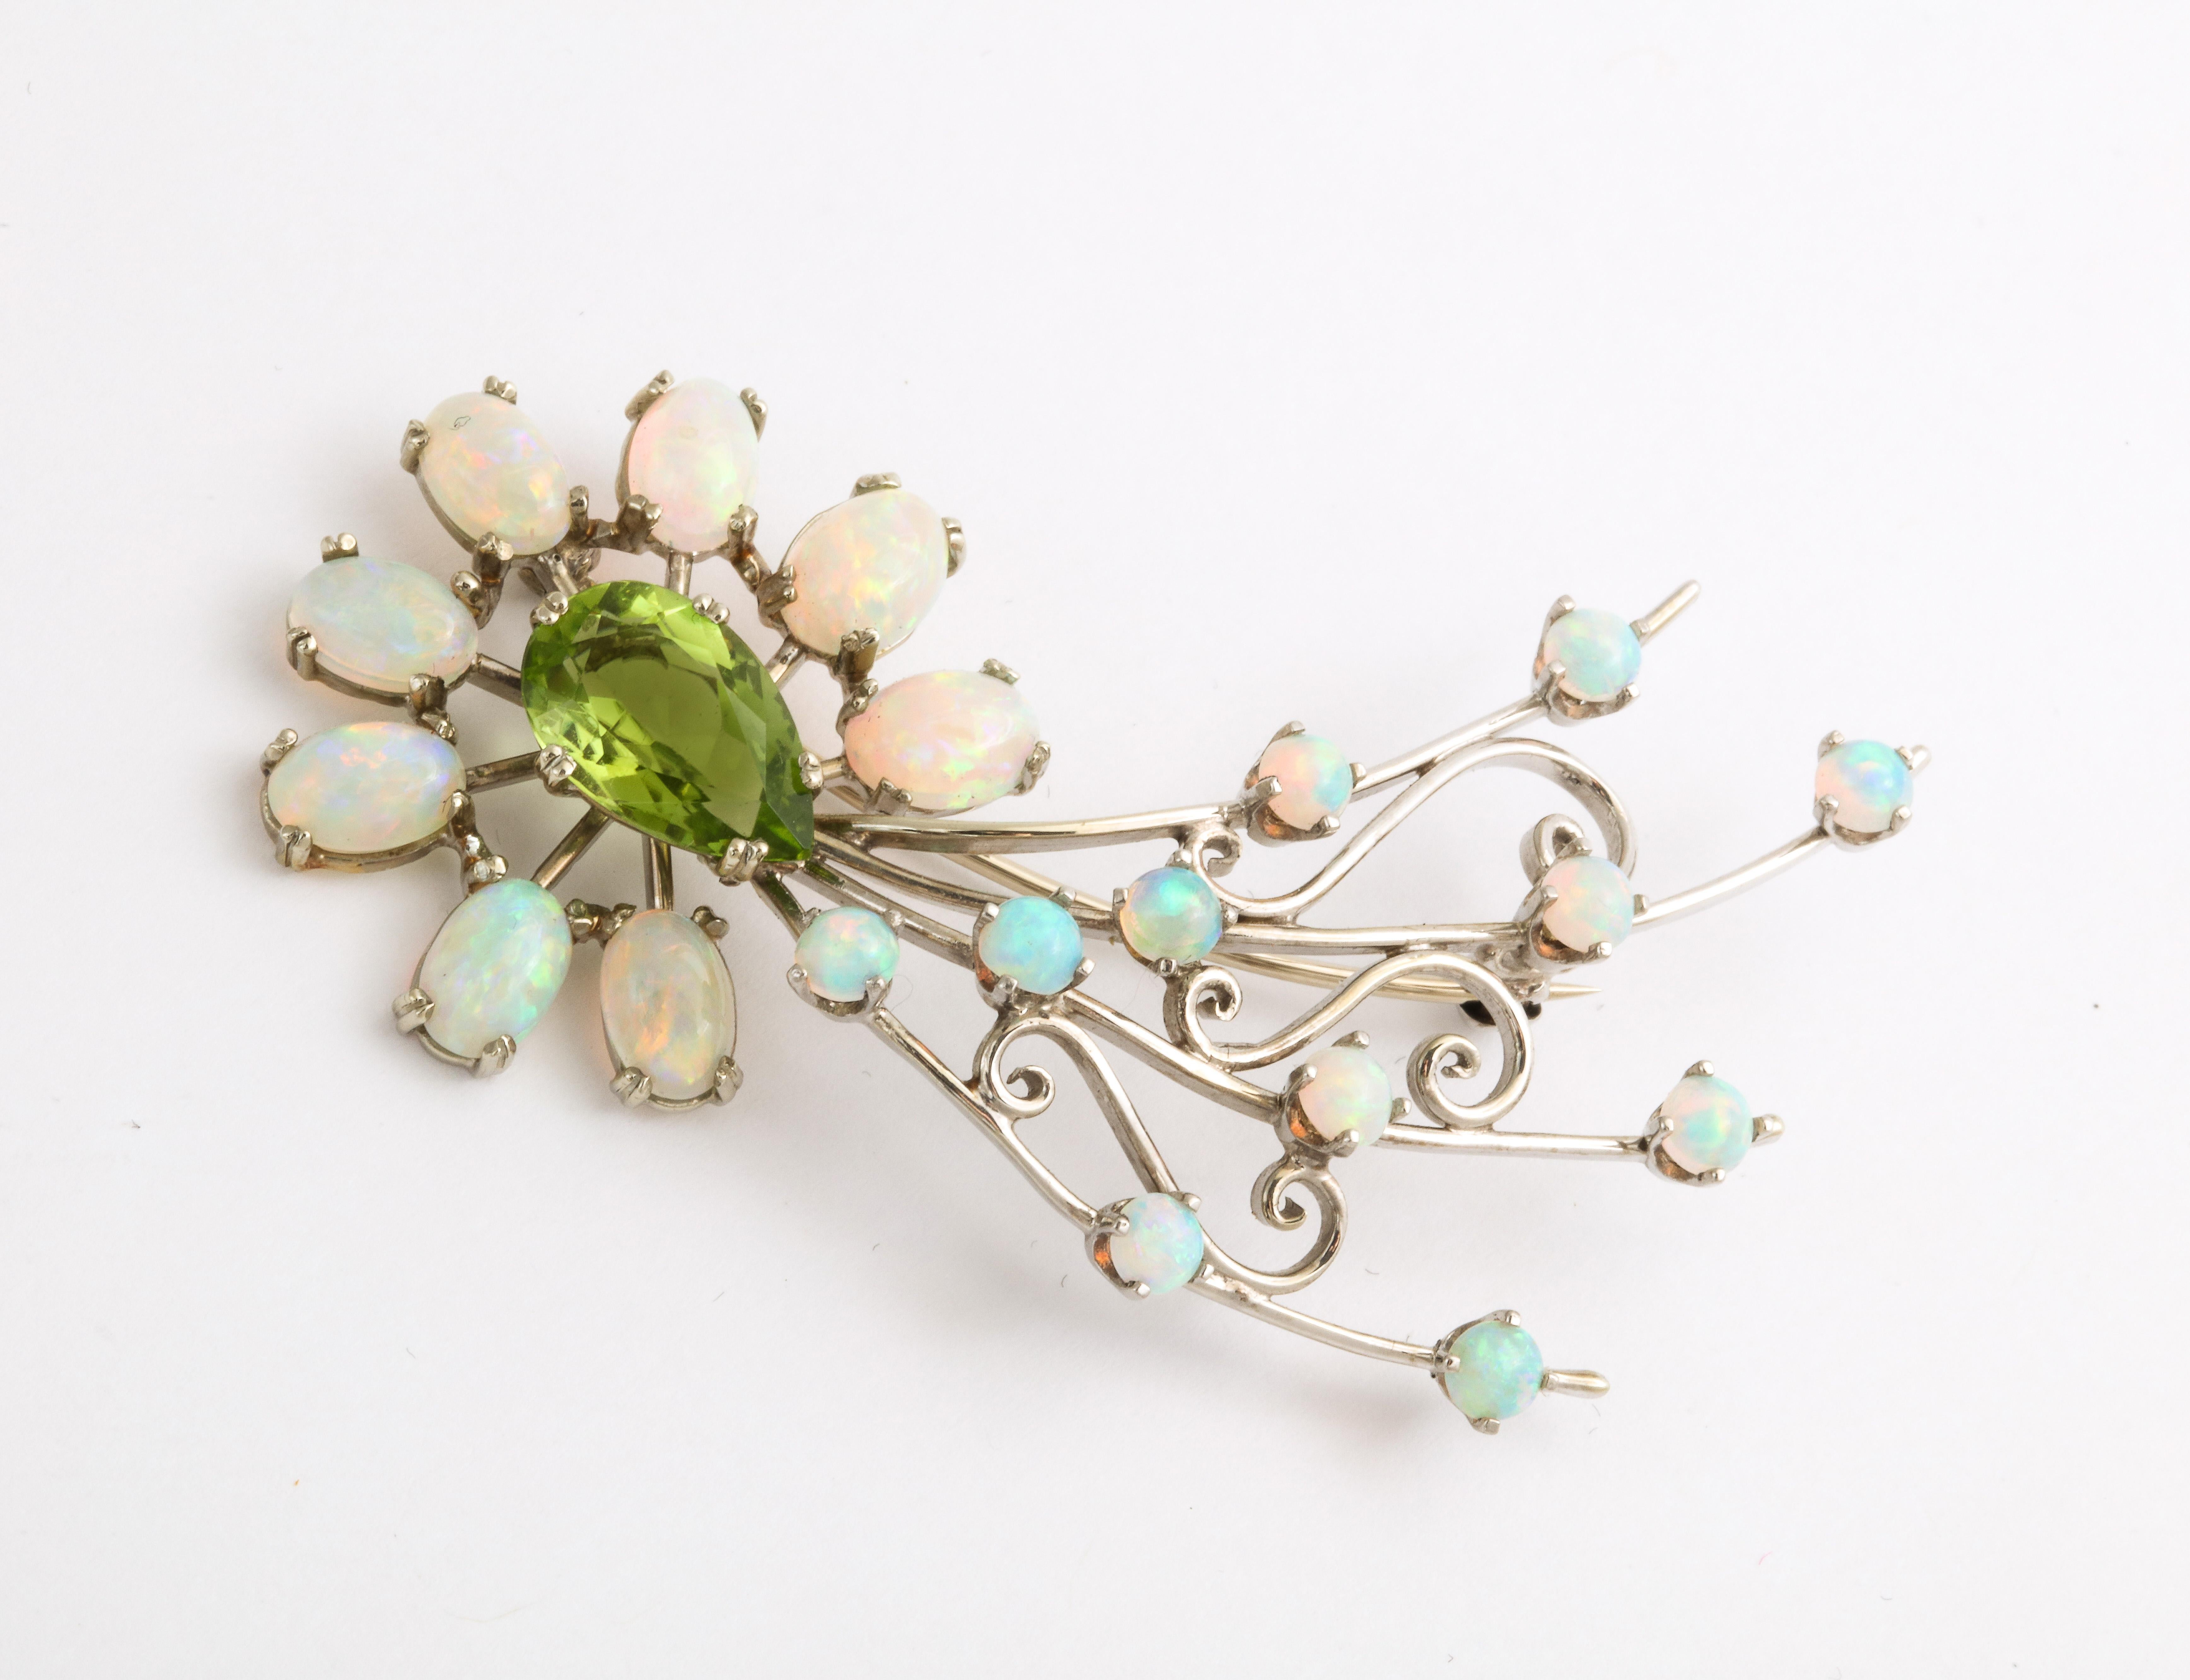 A distinctive 18 Kt gold comet brooch, larger than most and brilliant with opals around the peridot head and the peacock like tail. Be it in the heavens or on you lapel, dress, hat or sweater it is heavily drama. Haleys Comet was last seen from